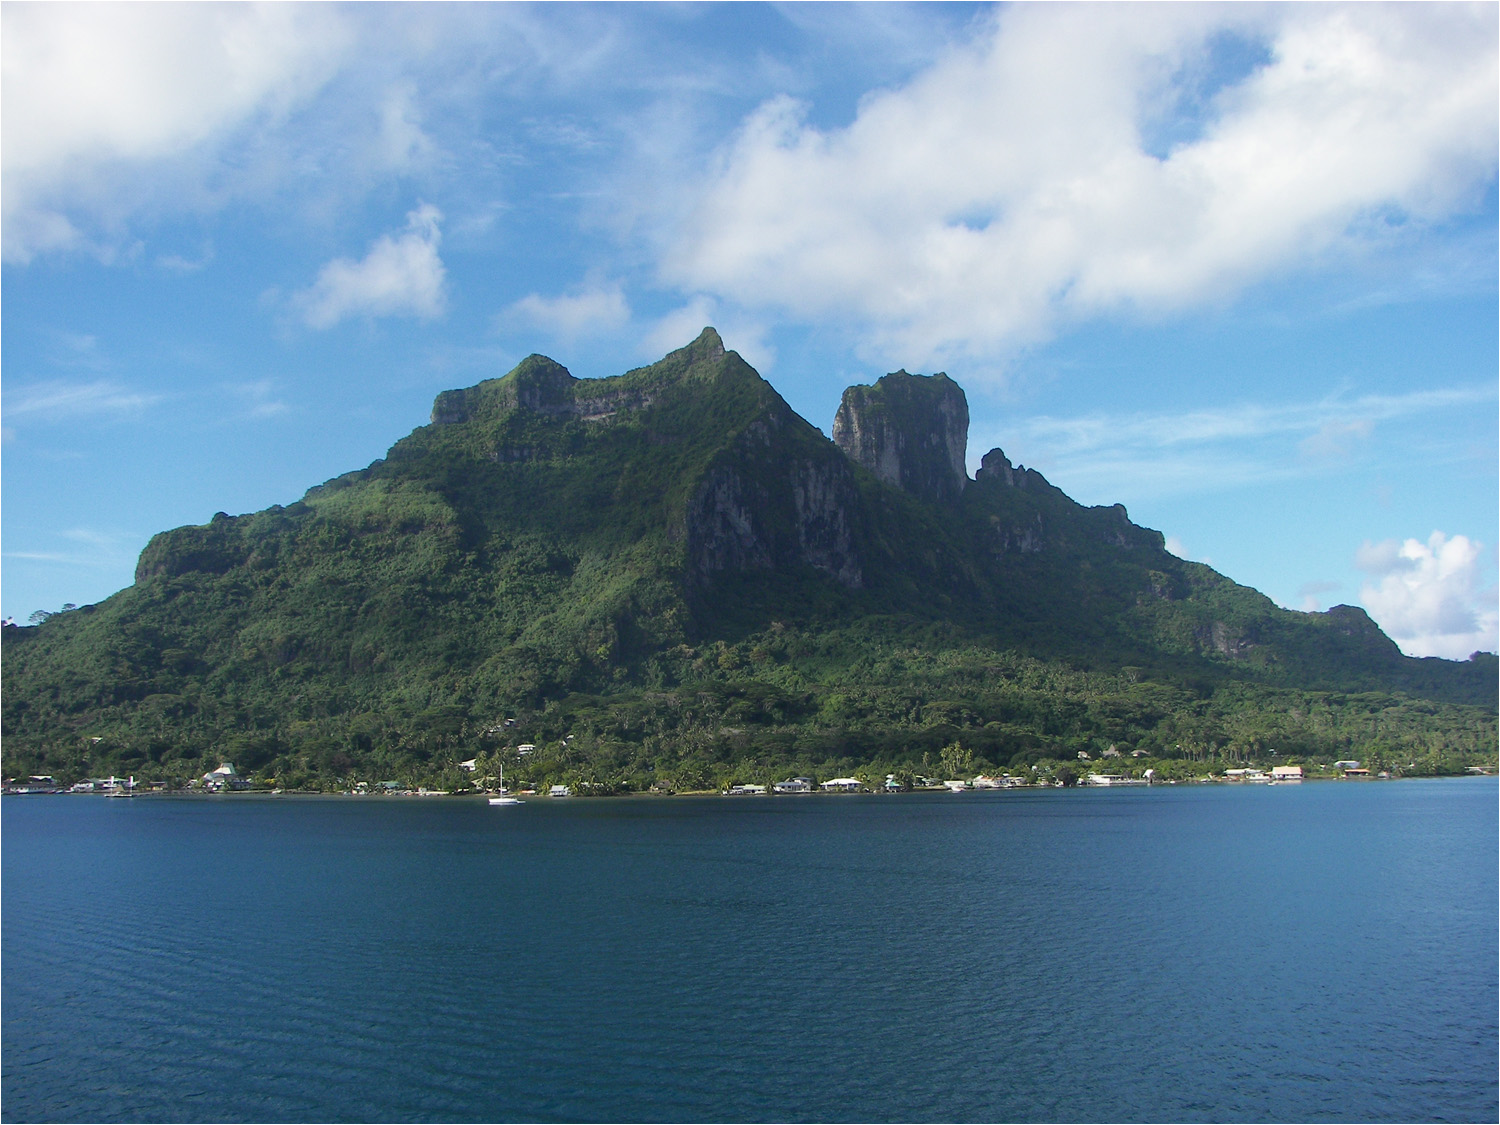 View of main peaks on Bora Bora from ship (1 of 2)